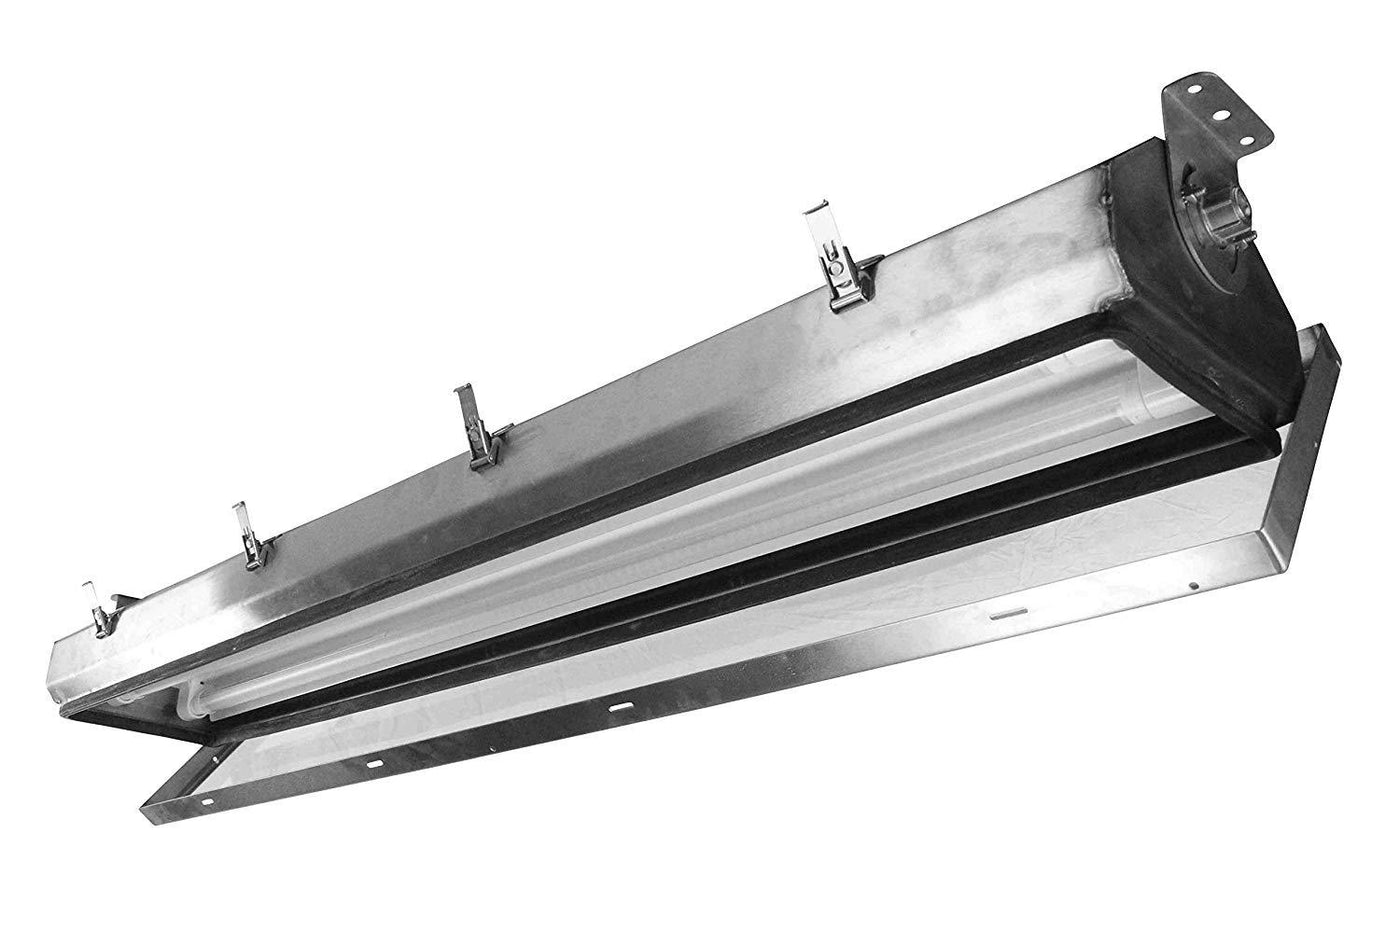 4 Foot, 2 Lamp Stainless Steel Hazardous Area Offshore LED Light for Corrosive Marine Environments, 56W